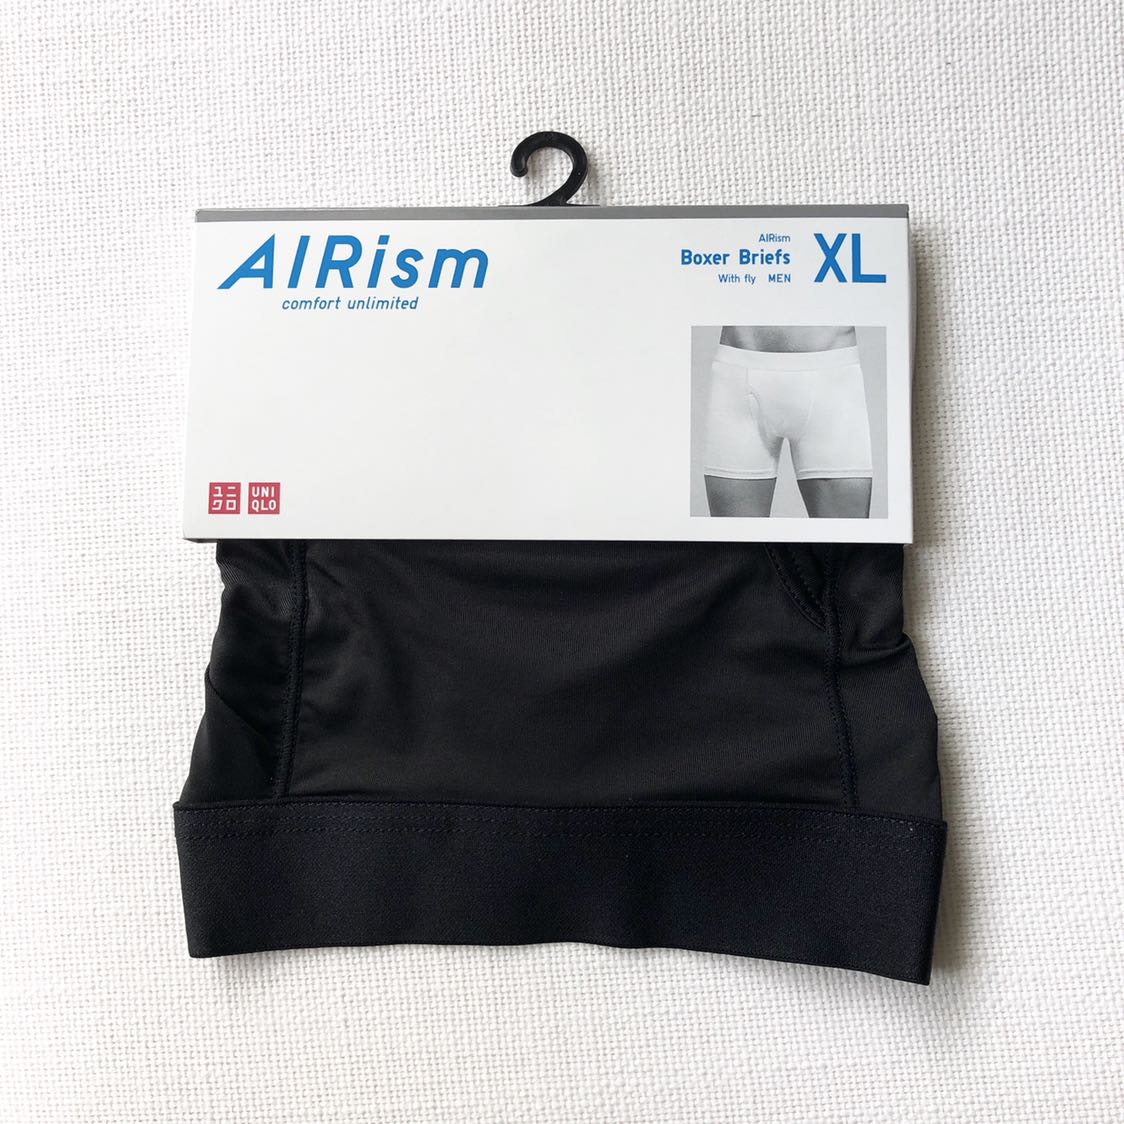 https://media.karousell.com/media/photos/products/2020/01/02/uniqlo_airism_boxer_briefs_1577935862_4a848160.jpg